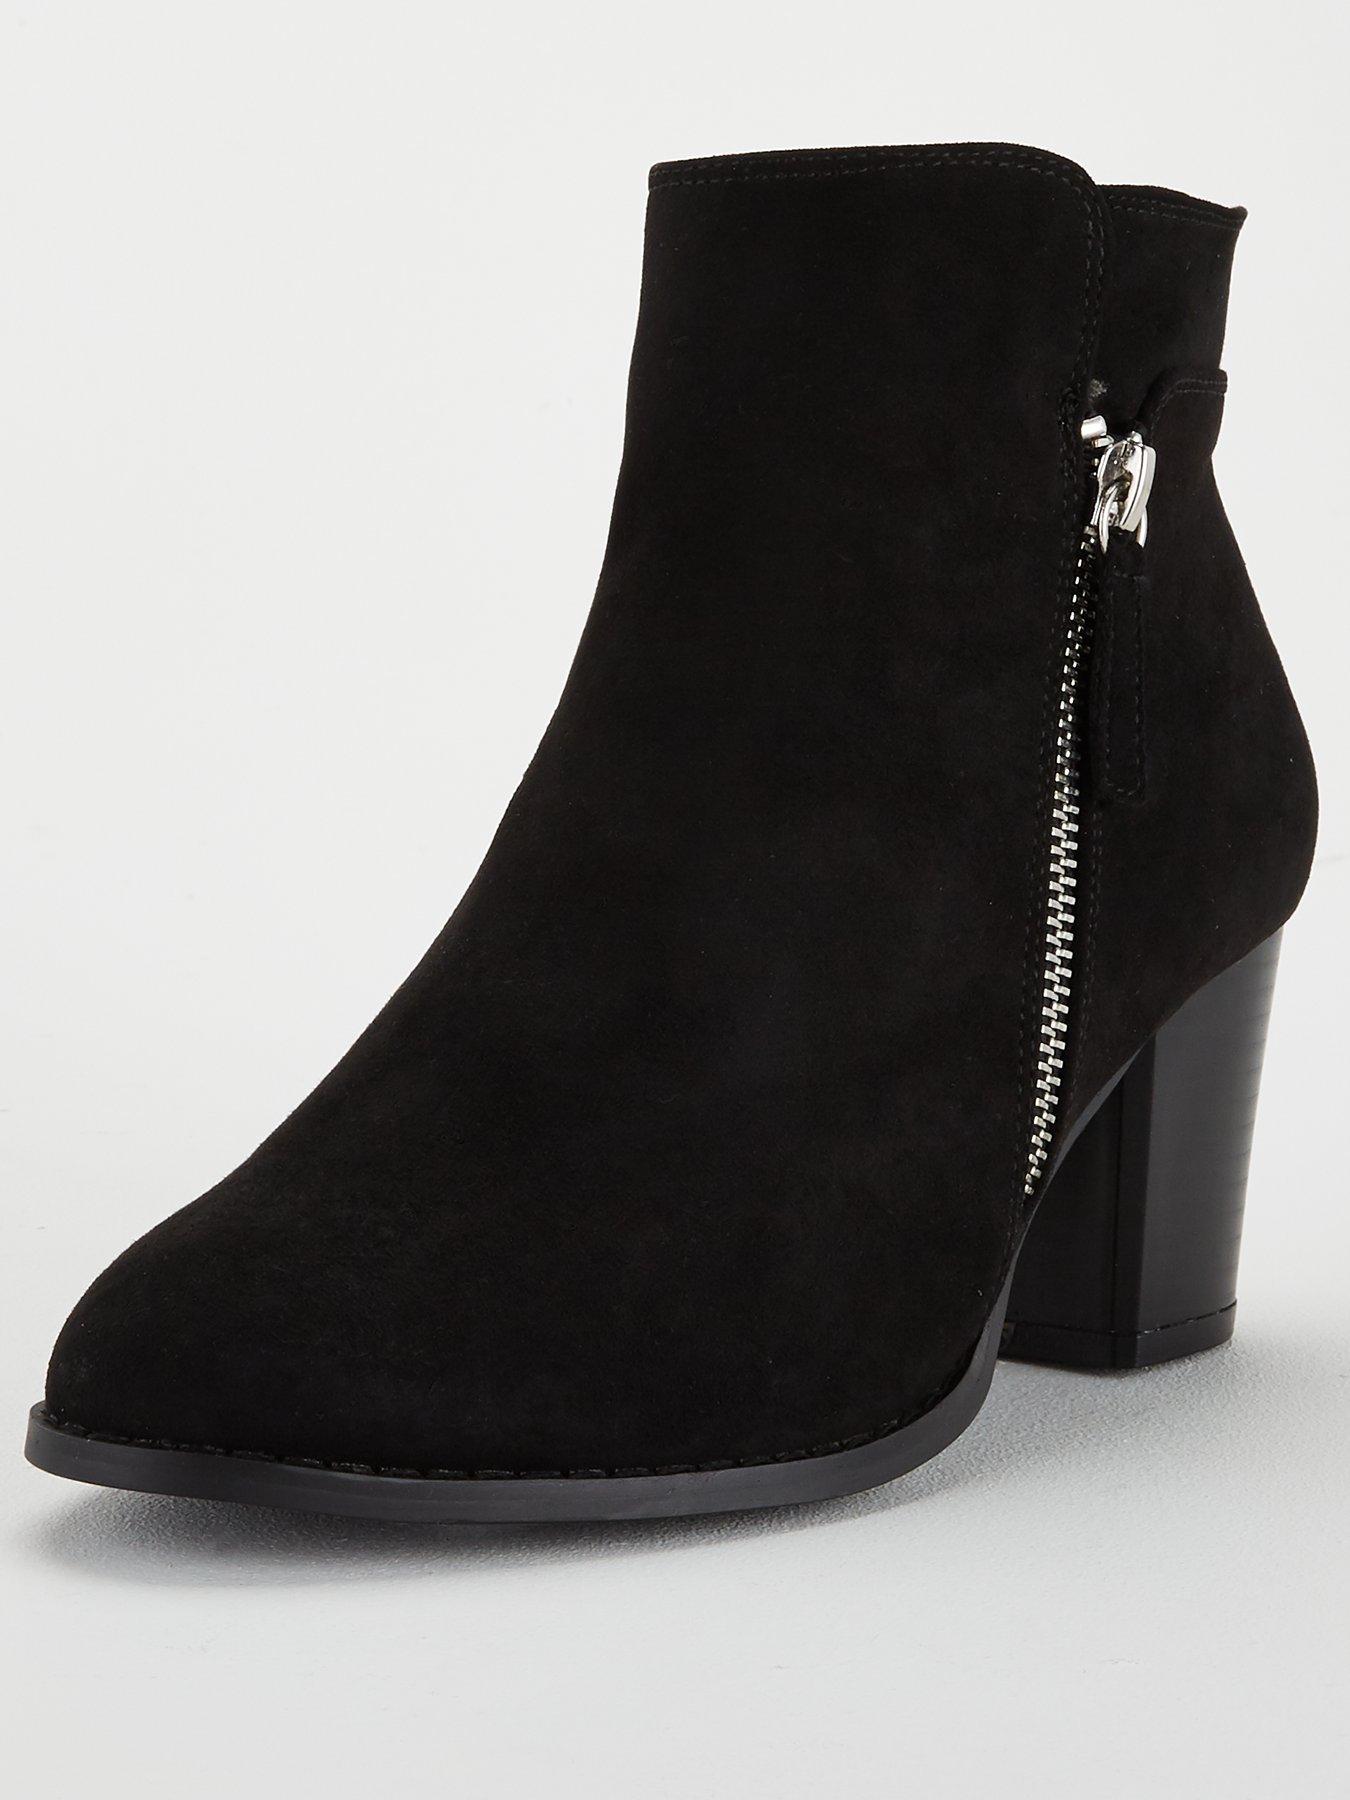 wide ankle boots low heel